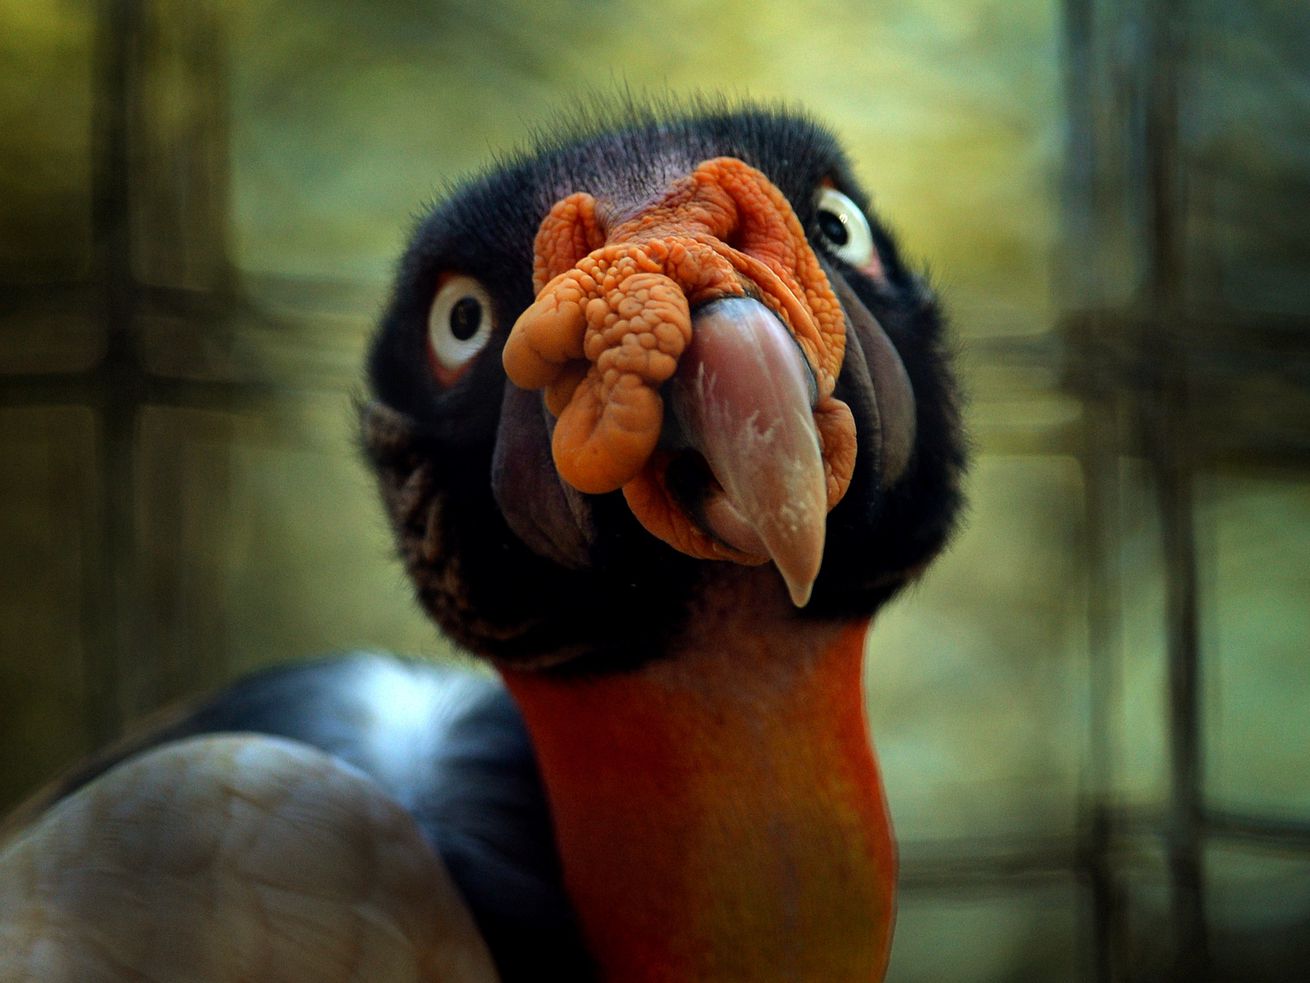 The face of a king vulture.